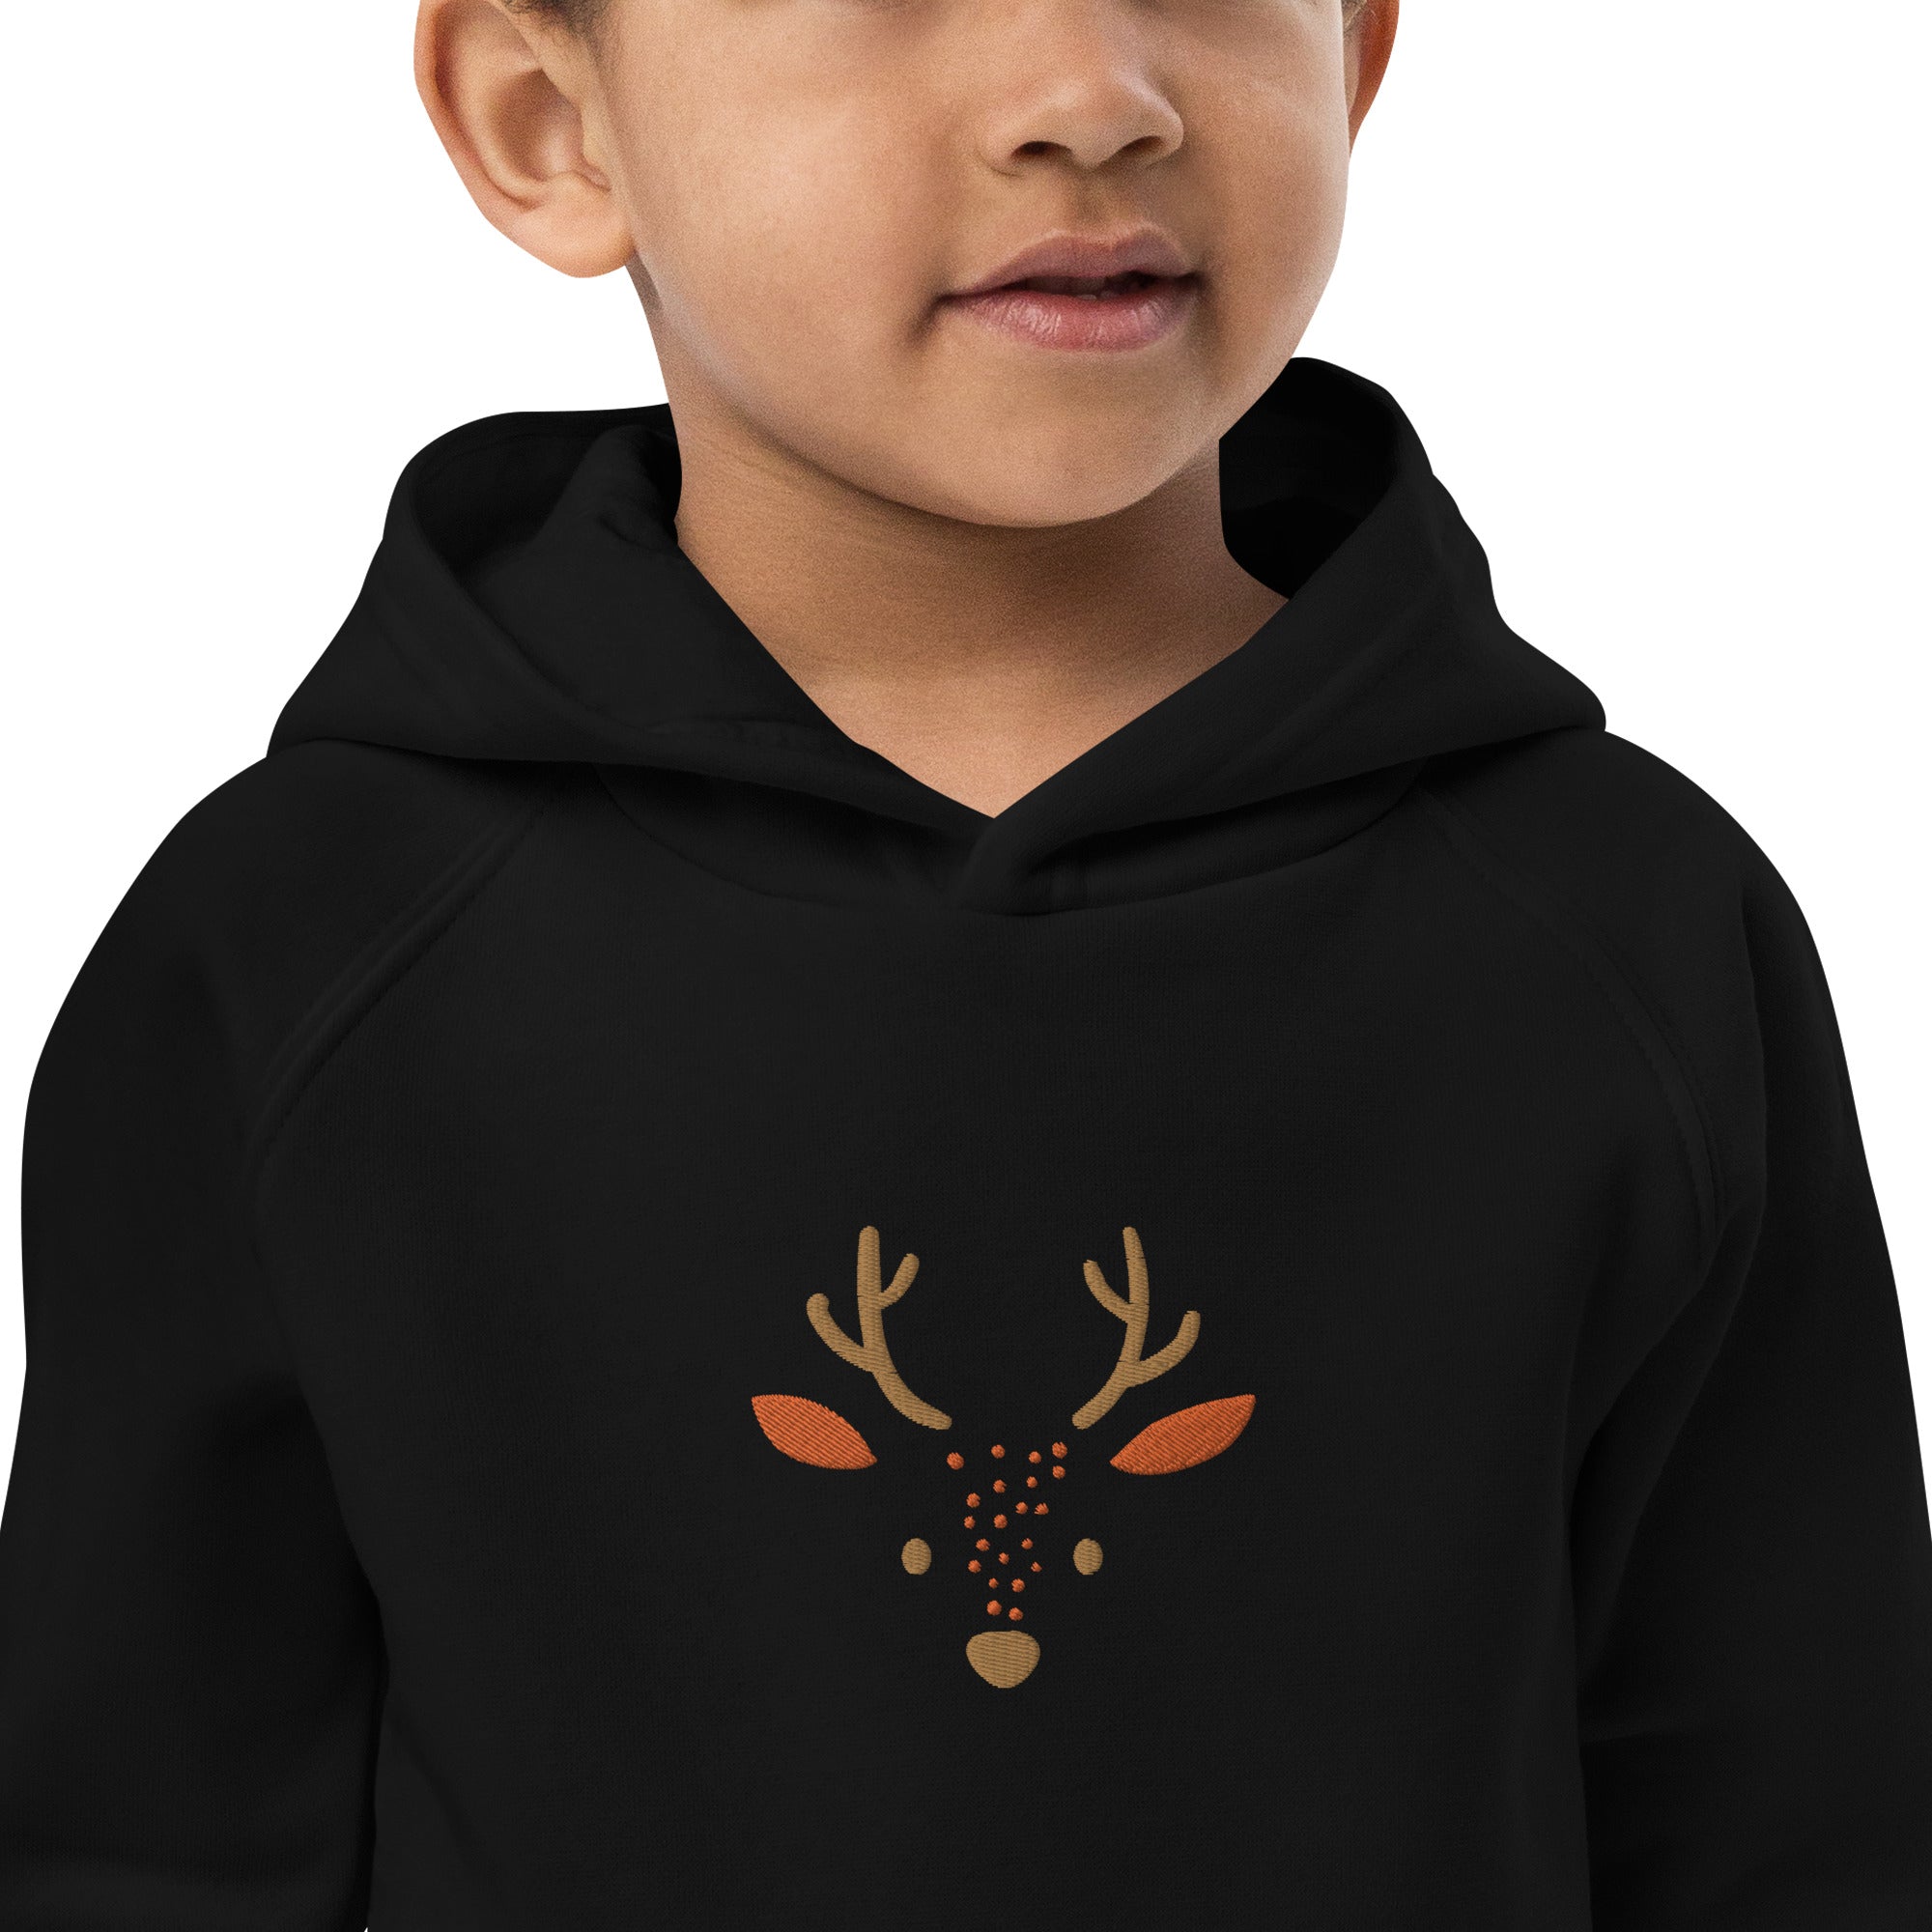 Deer 2 Kids Eco Hoodie with cute animals, Organic Cotton pullover for children, gift idea for kids, soft hoodie for kids for Christmas-4